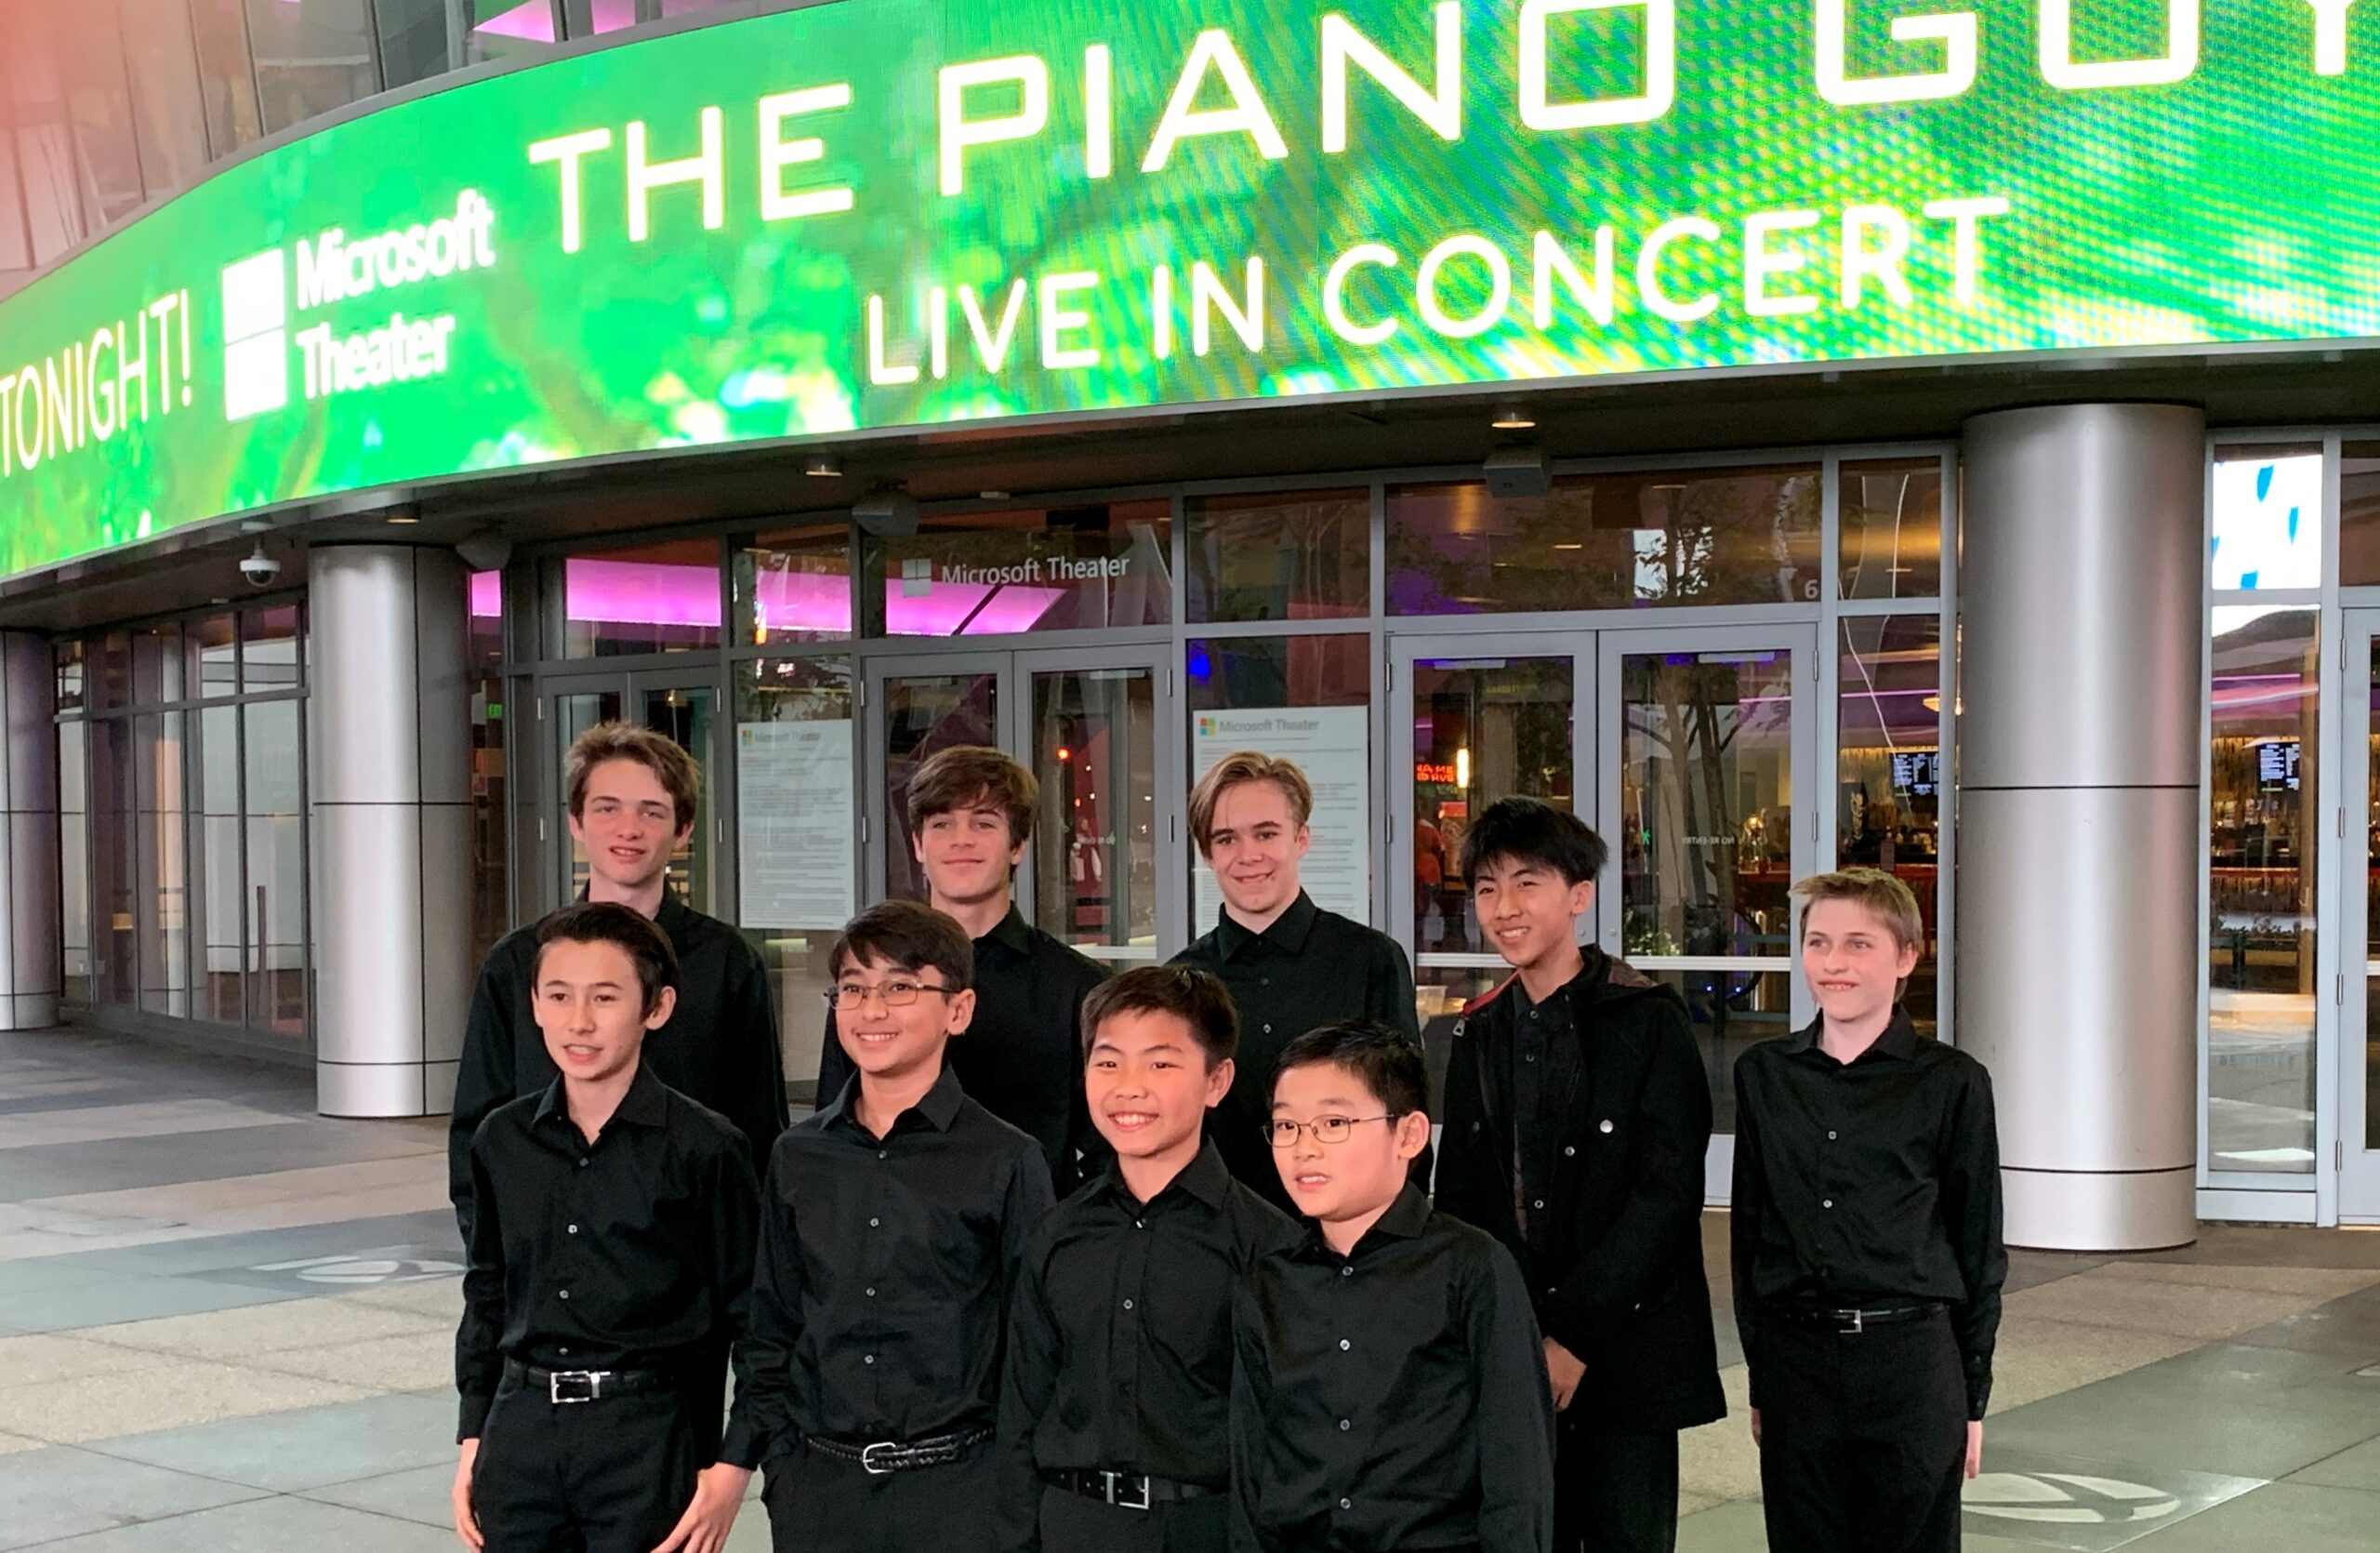 Wesley and Friends perform at Microsoft Theater